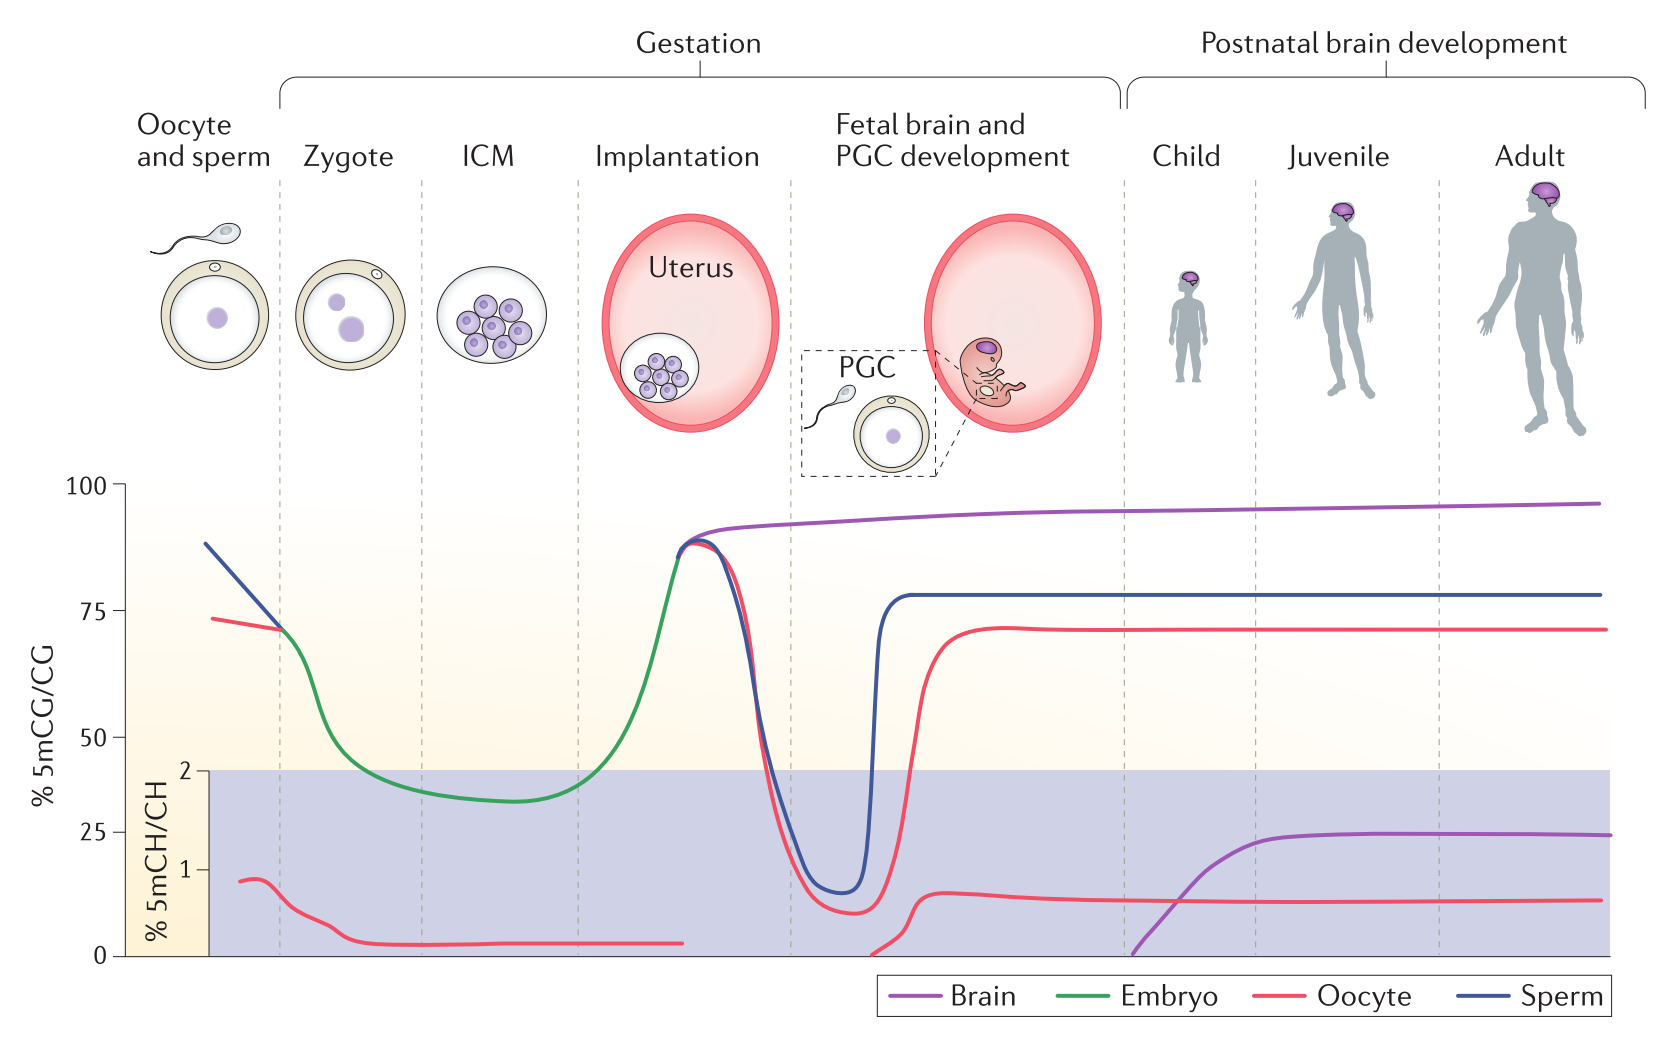 5mC levels over developmental time. 5mCH or 5-methylcytosine-(A, T or C) levels are represented on a separate (purple) Axis from the main 5mCG axis. PGC = Primordial Germ Cell. (Figure reproduced from [109] figure 3)